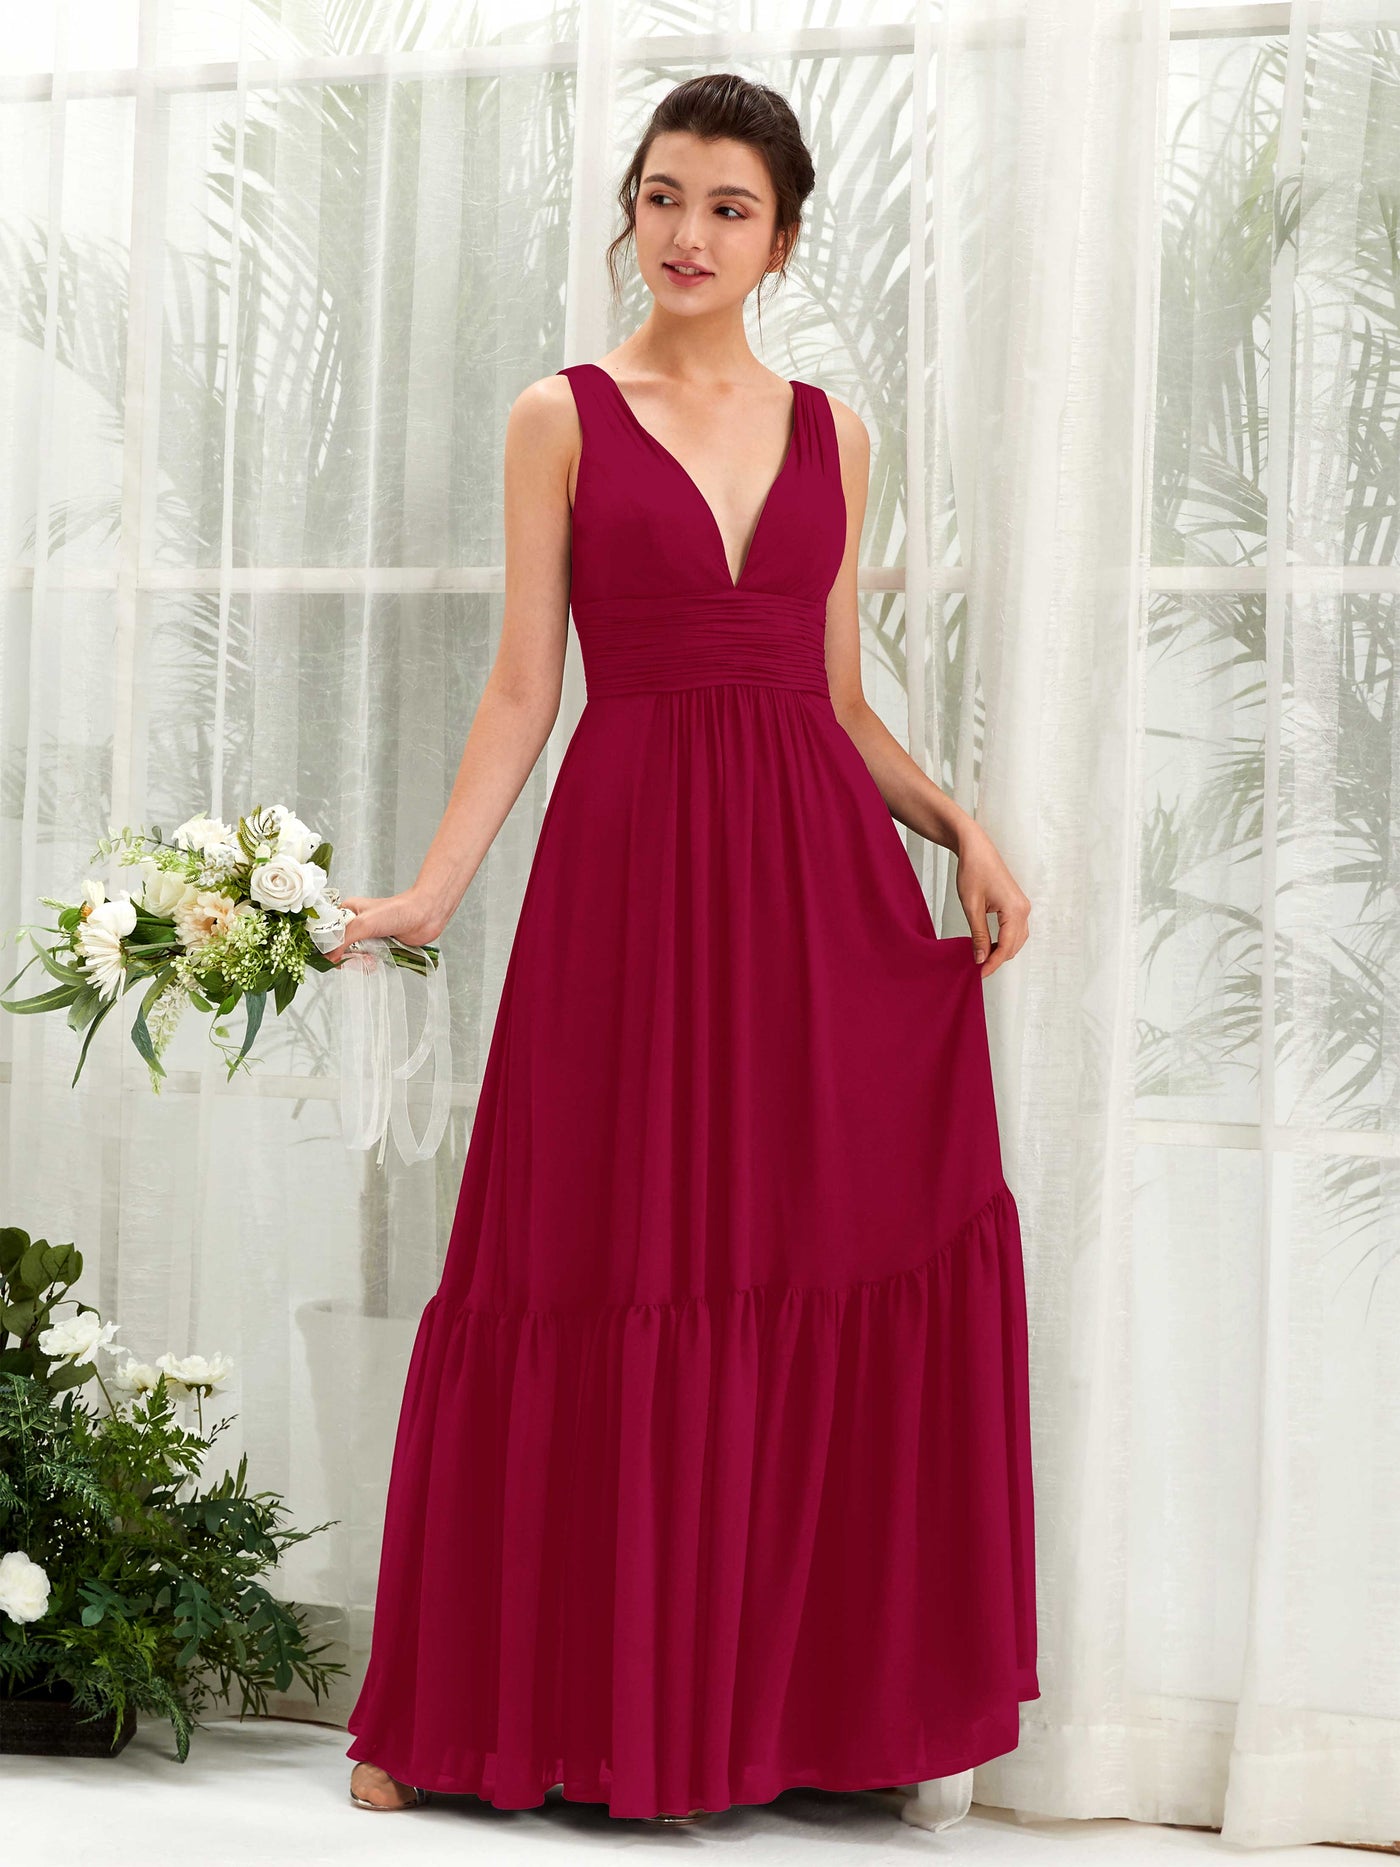 Jester Red Bridesmaid Dresses Bridesmaid Dress A-line Chiffon Straps Full Length Sleeveless Wedding Party Dress (80223741)#color_jester-red